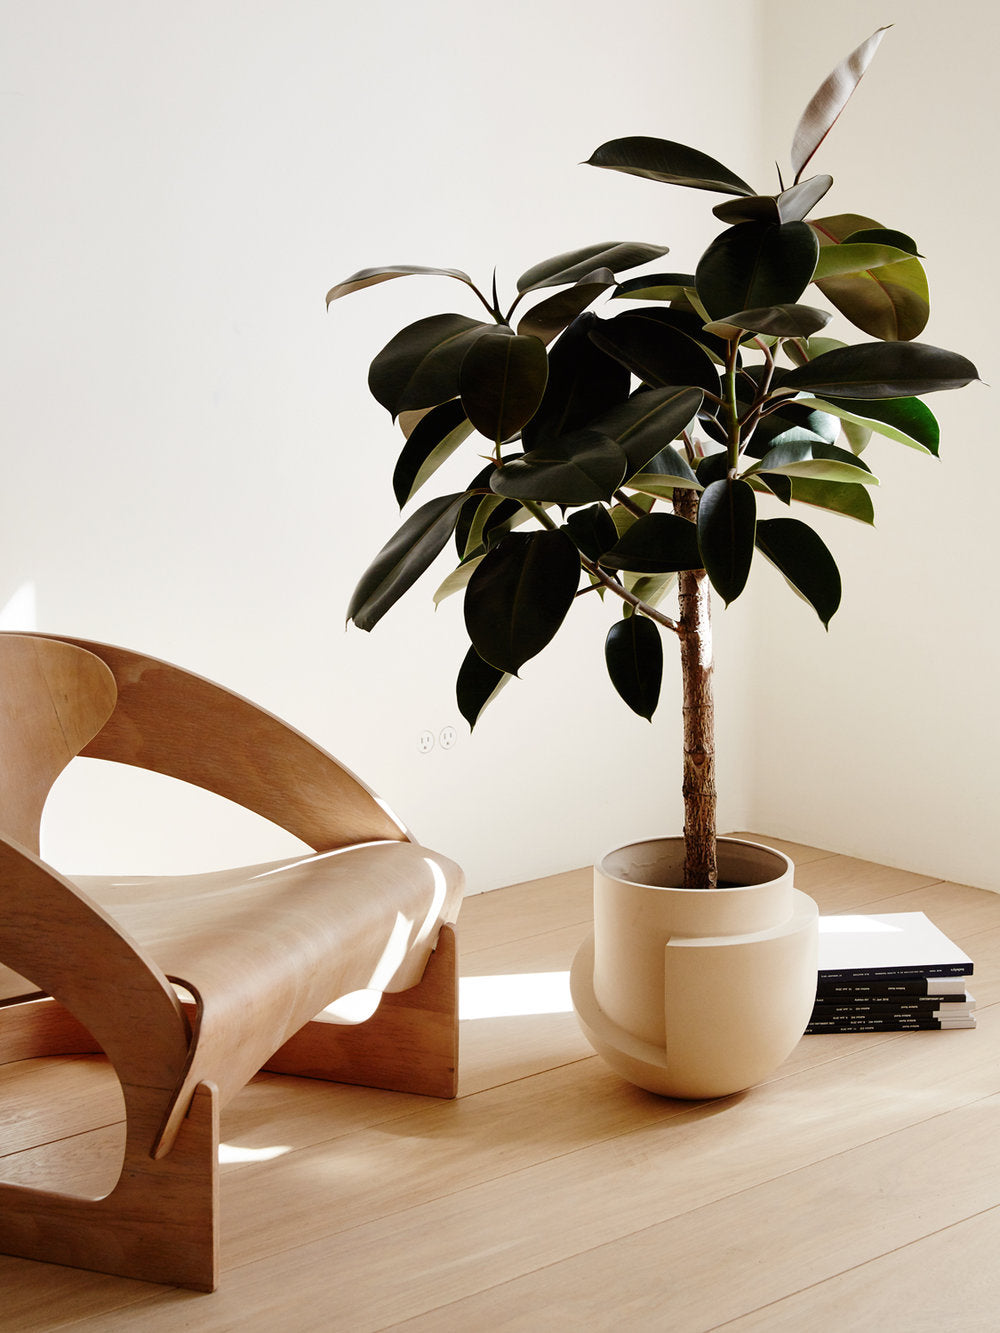 Sculptural vayu floor planter in warm sandy finish with rubber tree